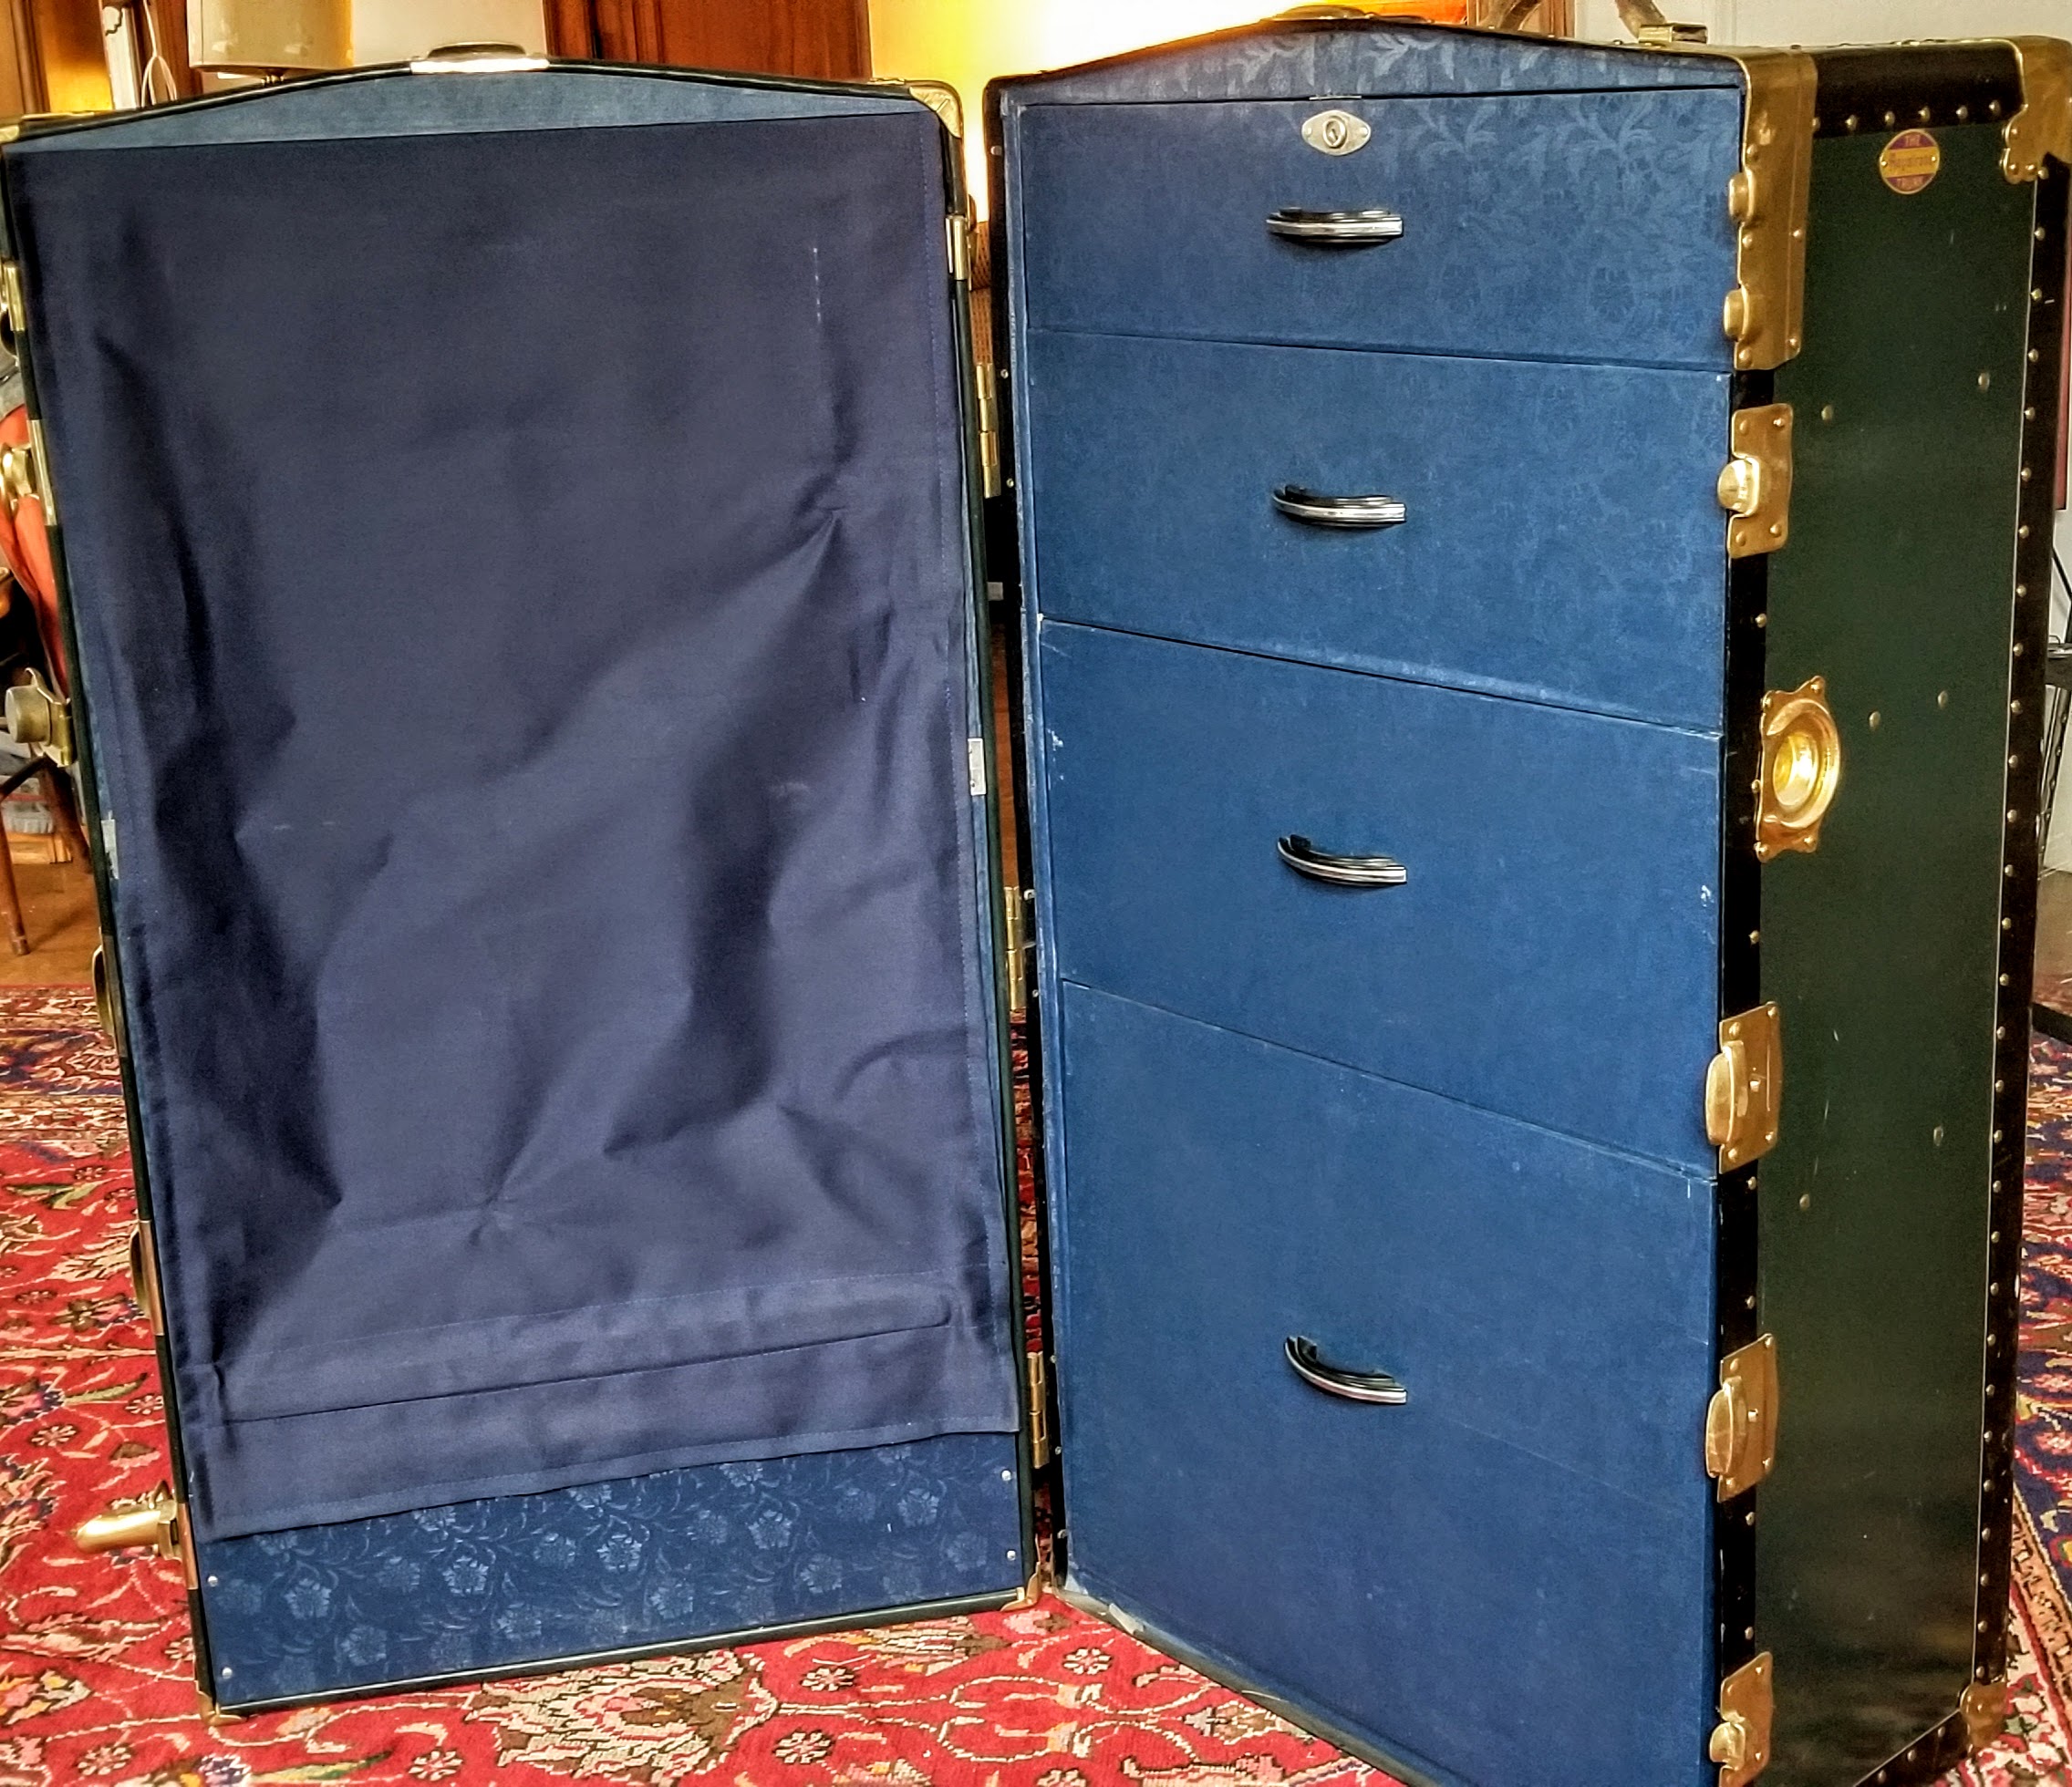 Vintage 'Royal Robe' Steamer Trunk in Excellent Condition. Local Pickup  Only – No Shipping. – Wycliffe Stuff